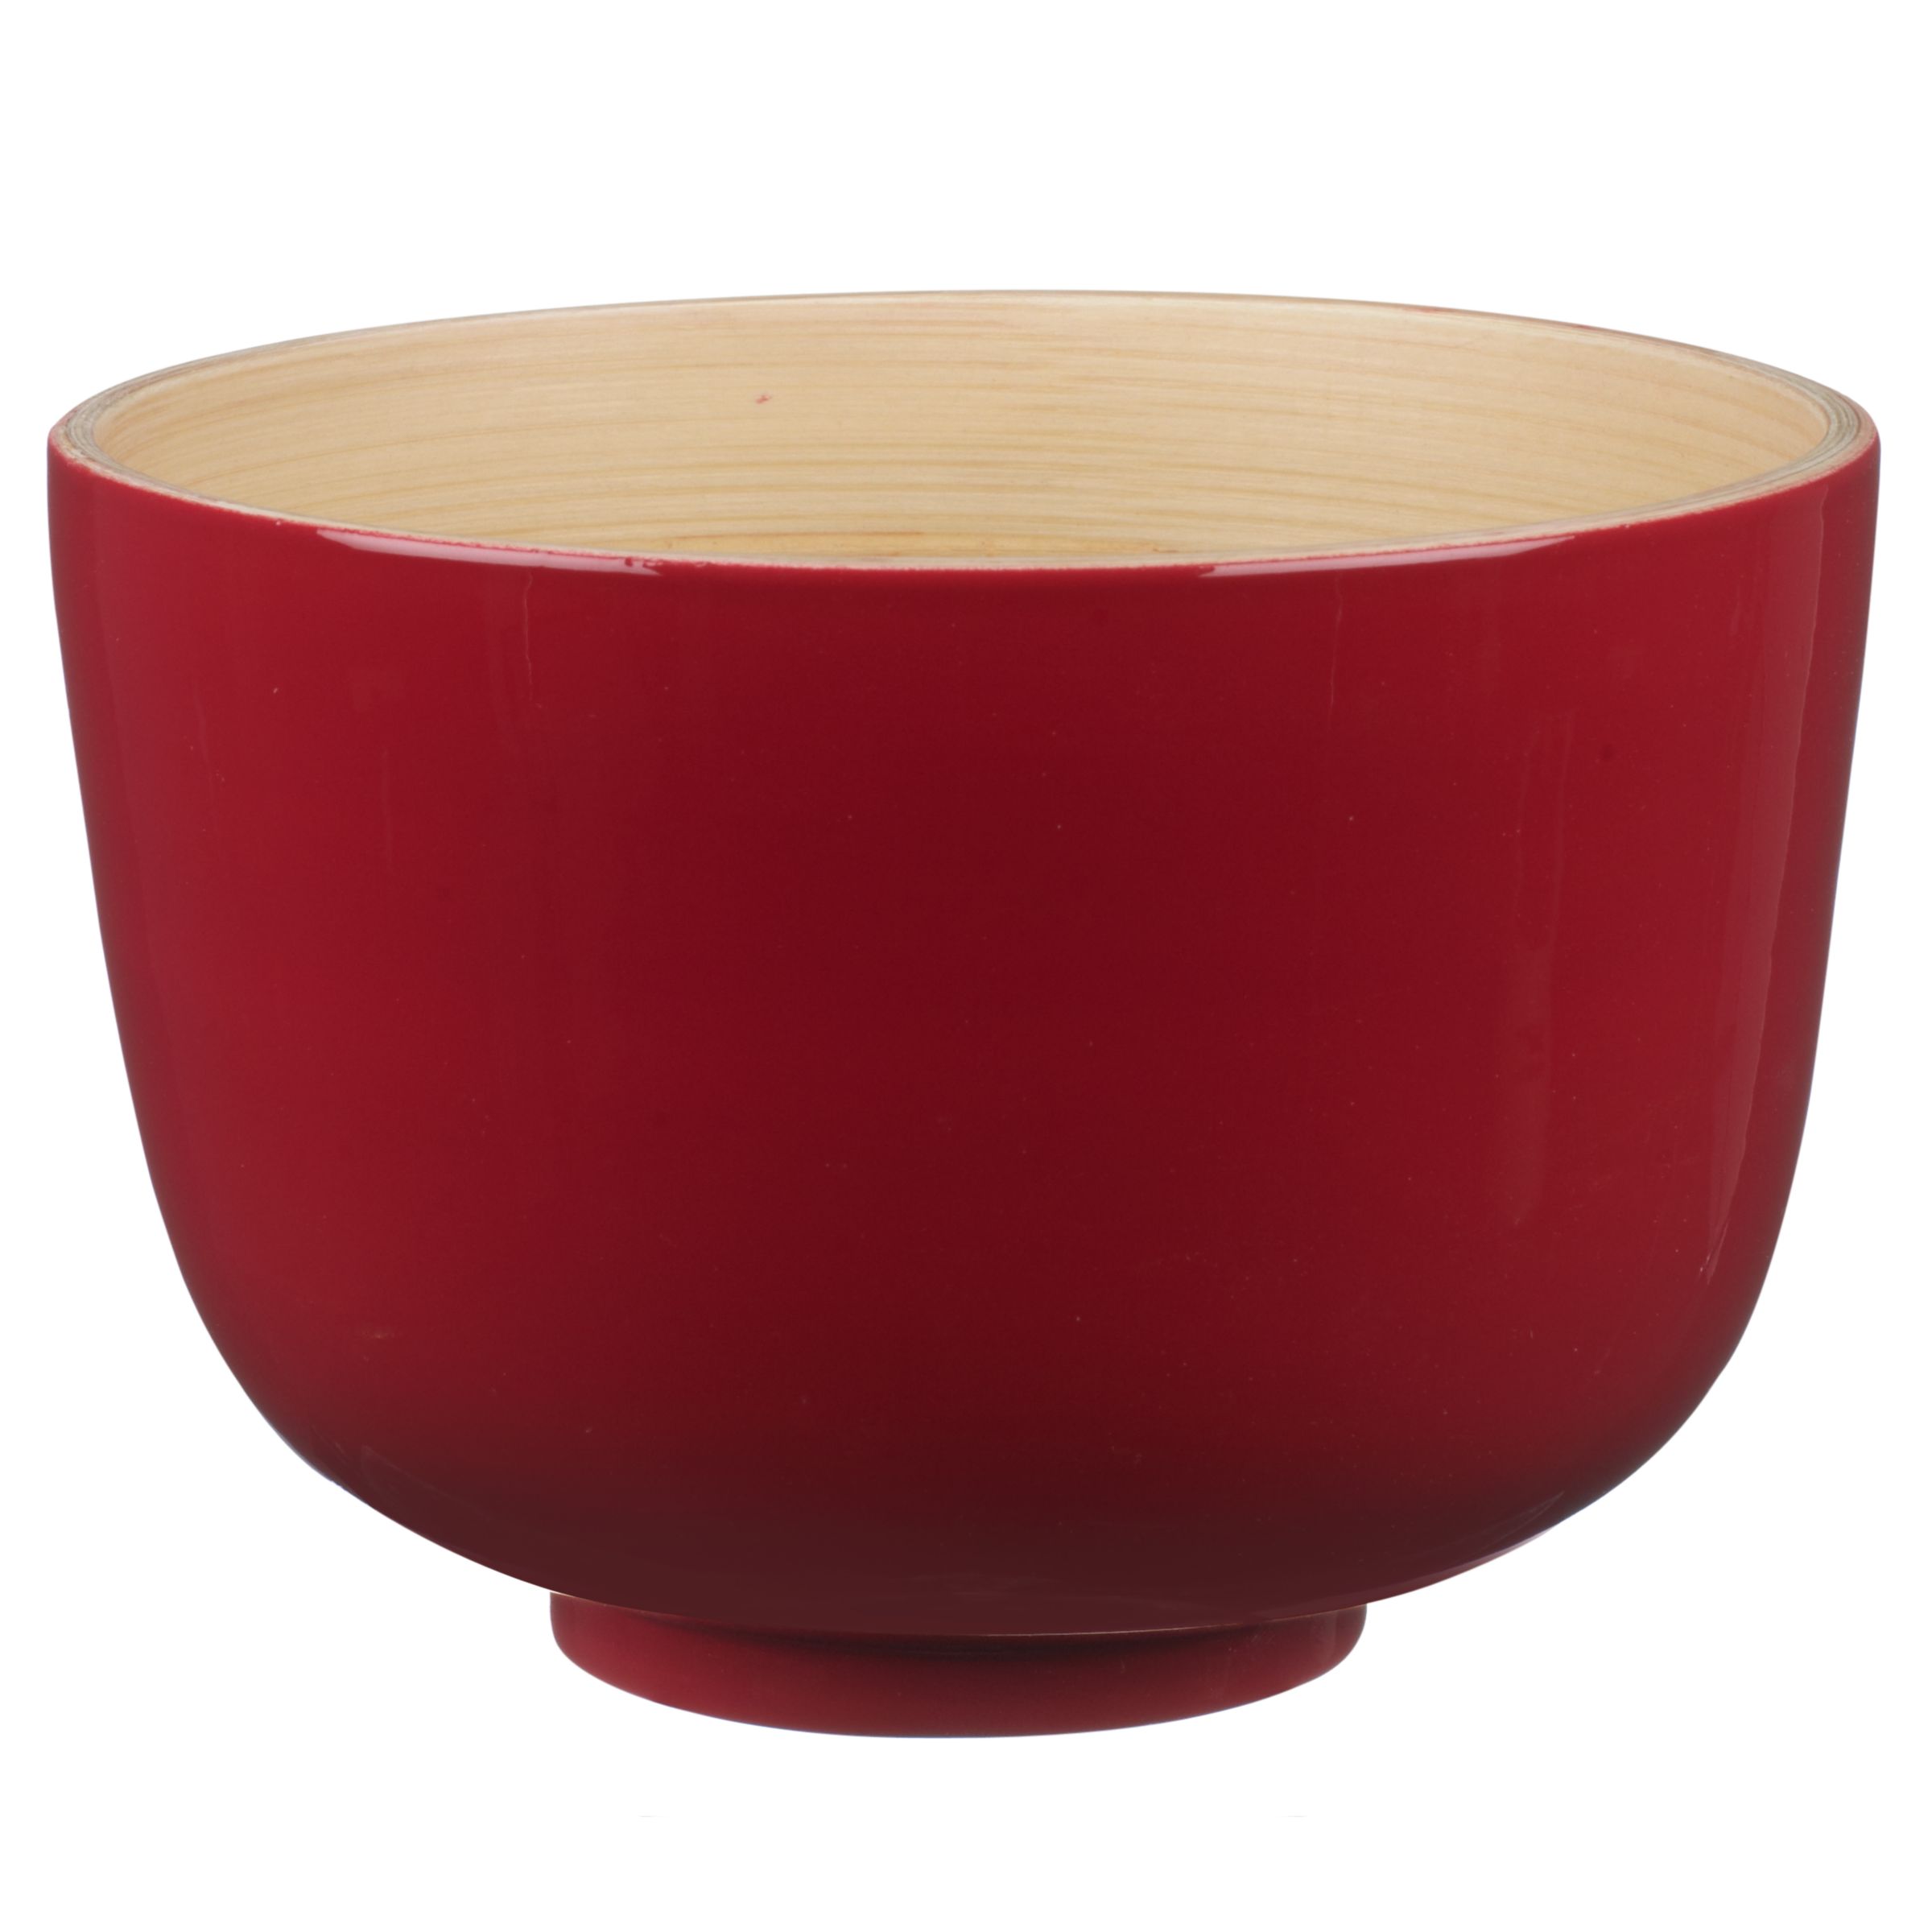 John Lewis Bamboo Serving Bowl, Red, Small